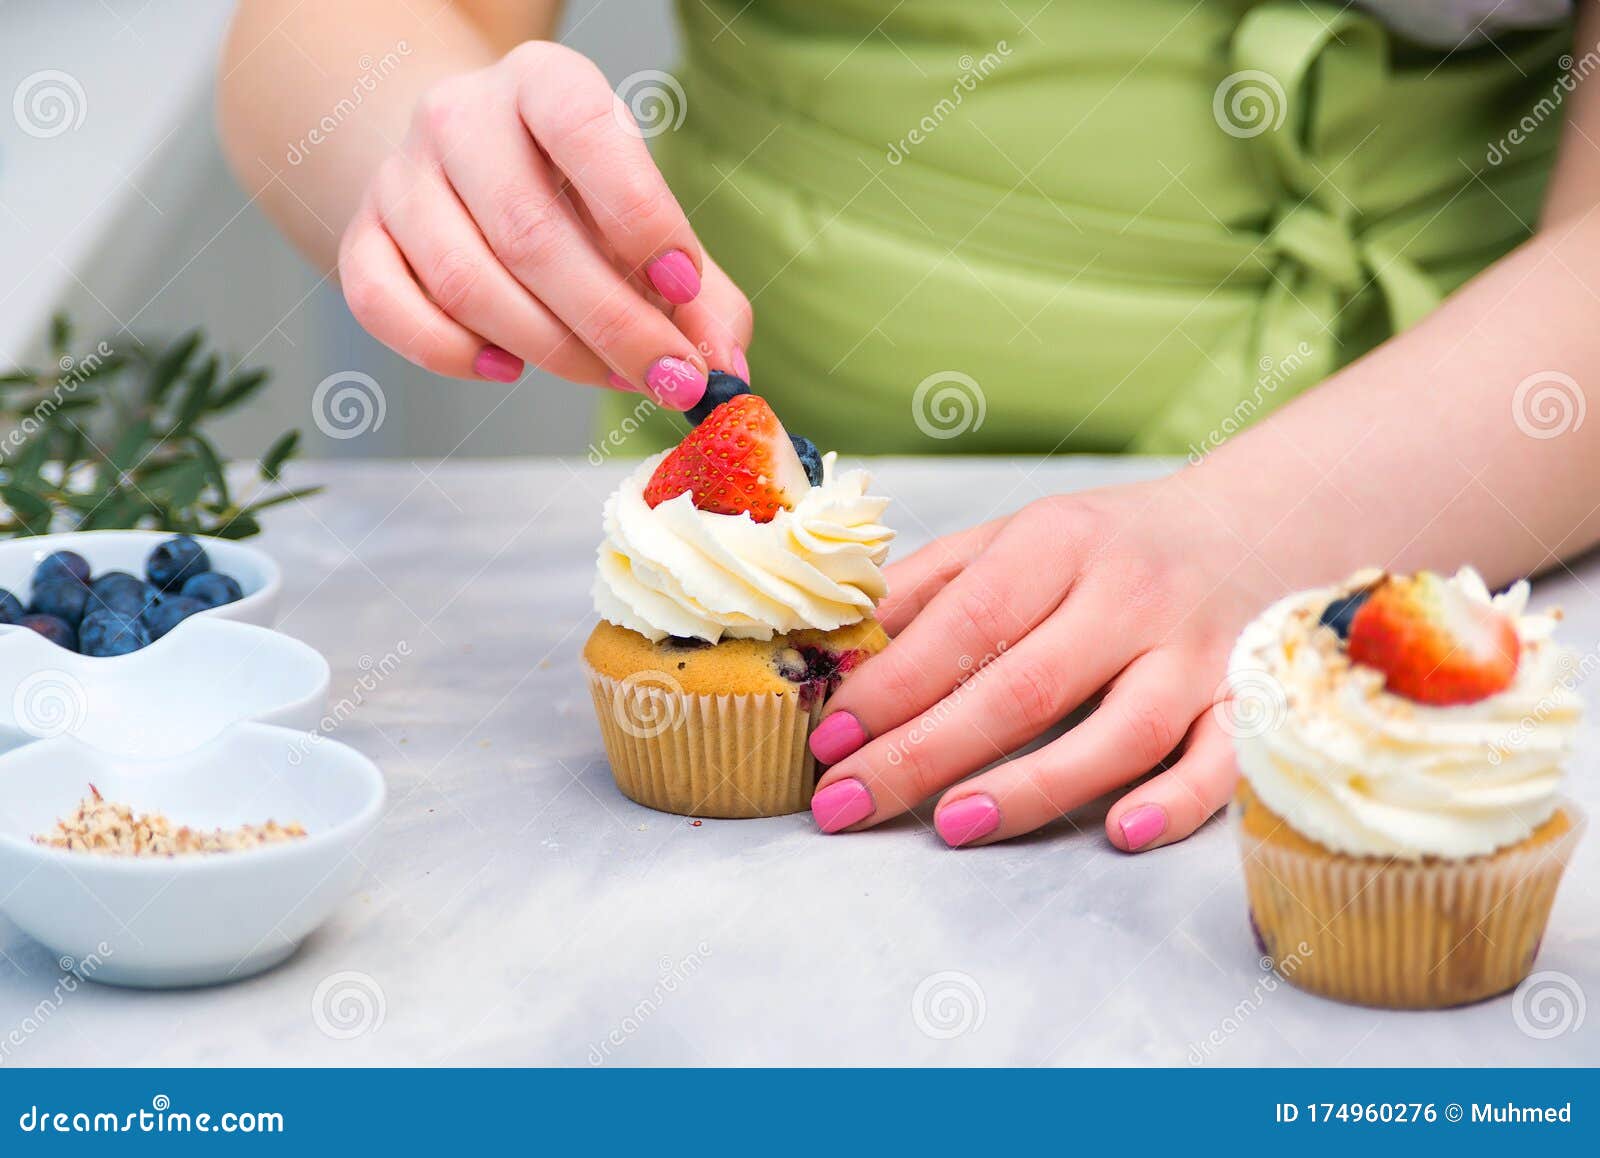 40+ Muffin Top Stomach Stock Photos, Pictures & Royalty-Free Images - iStock